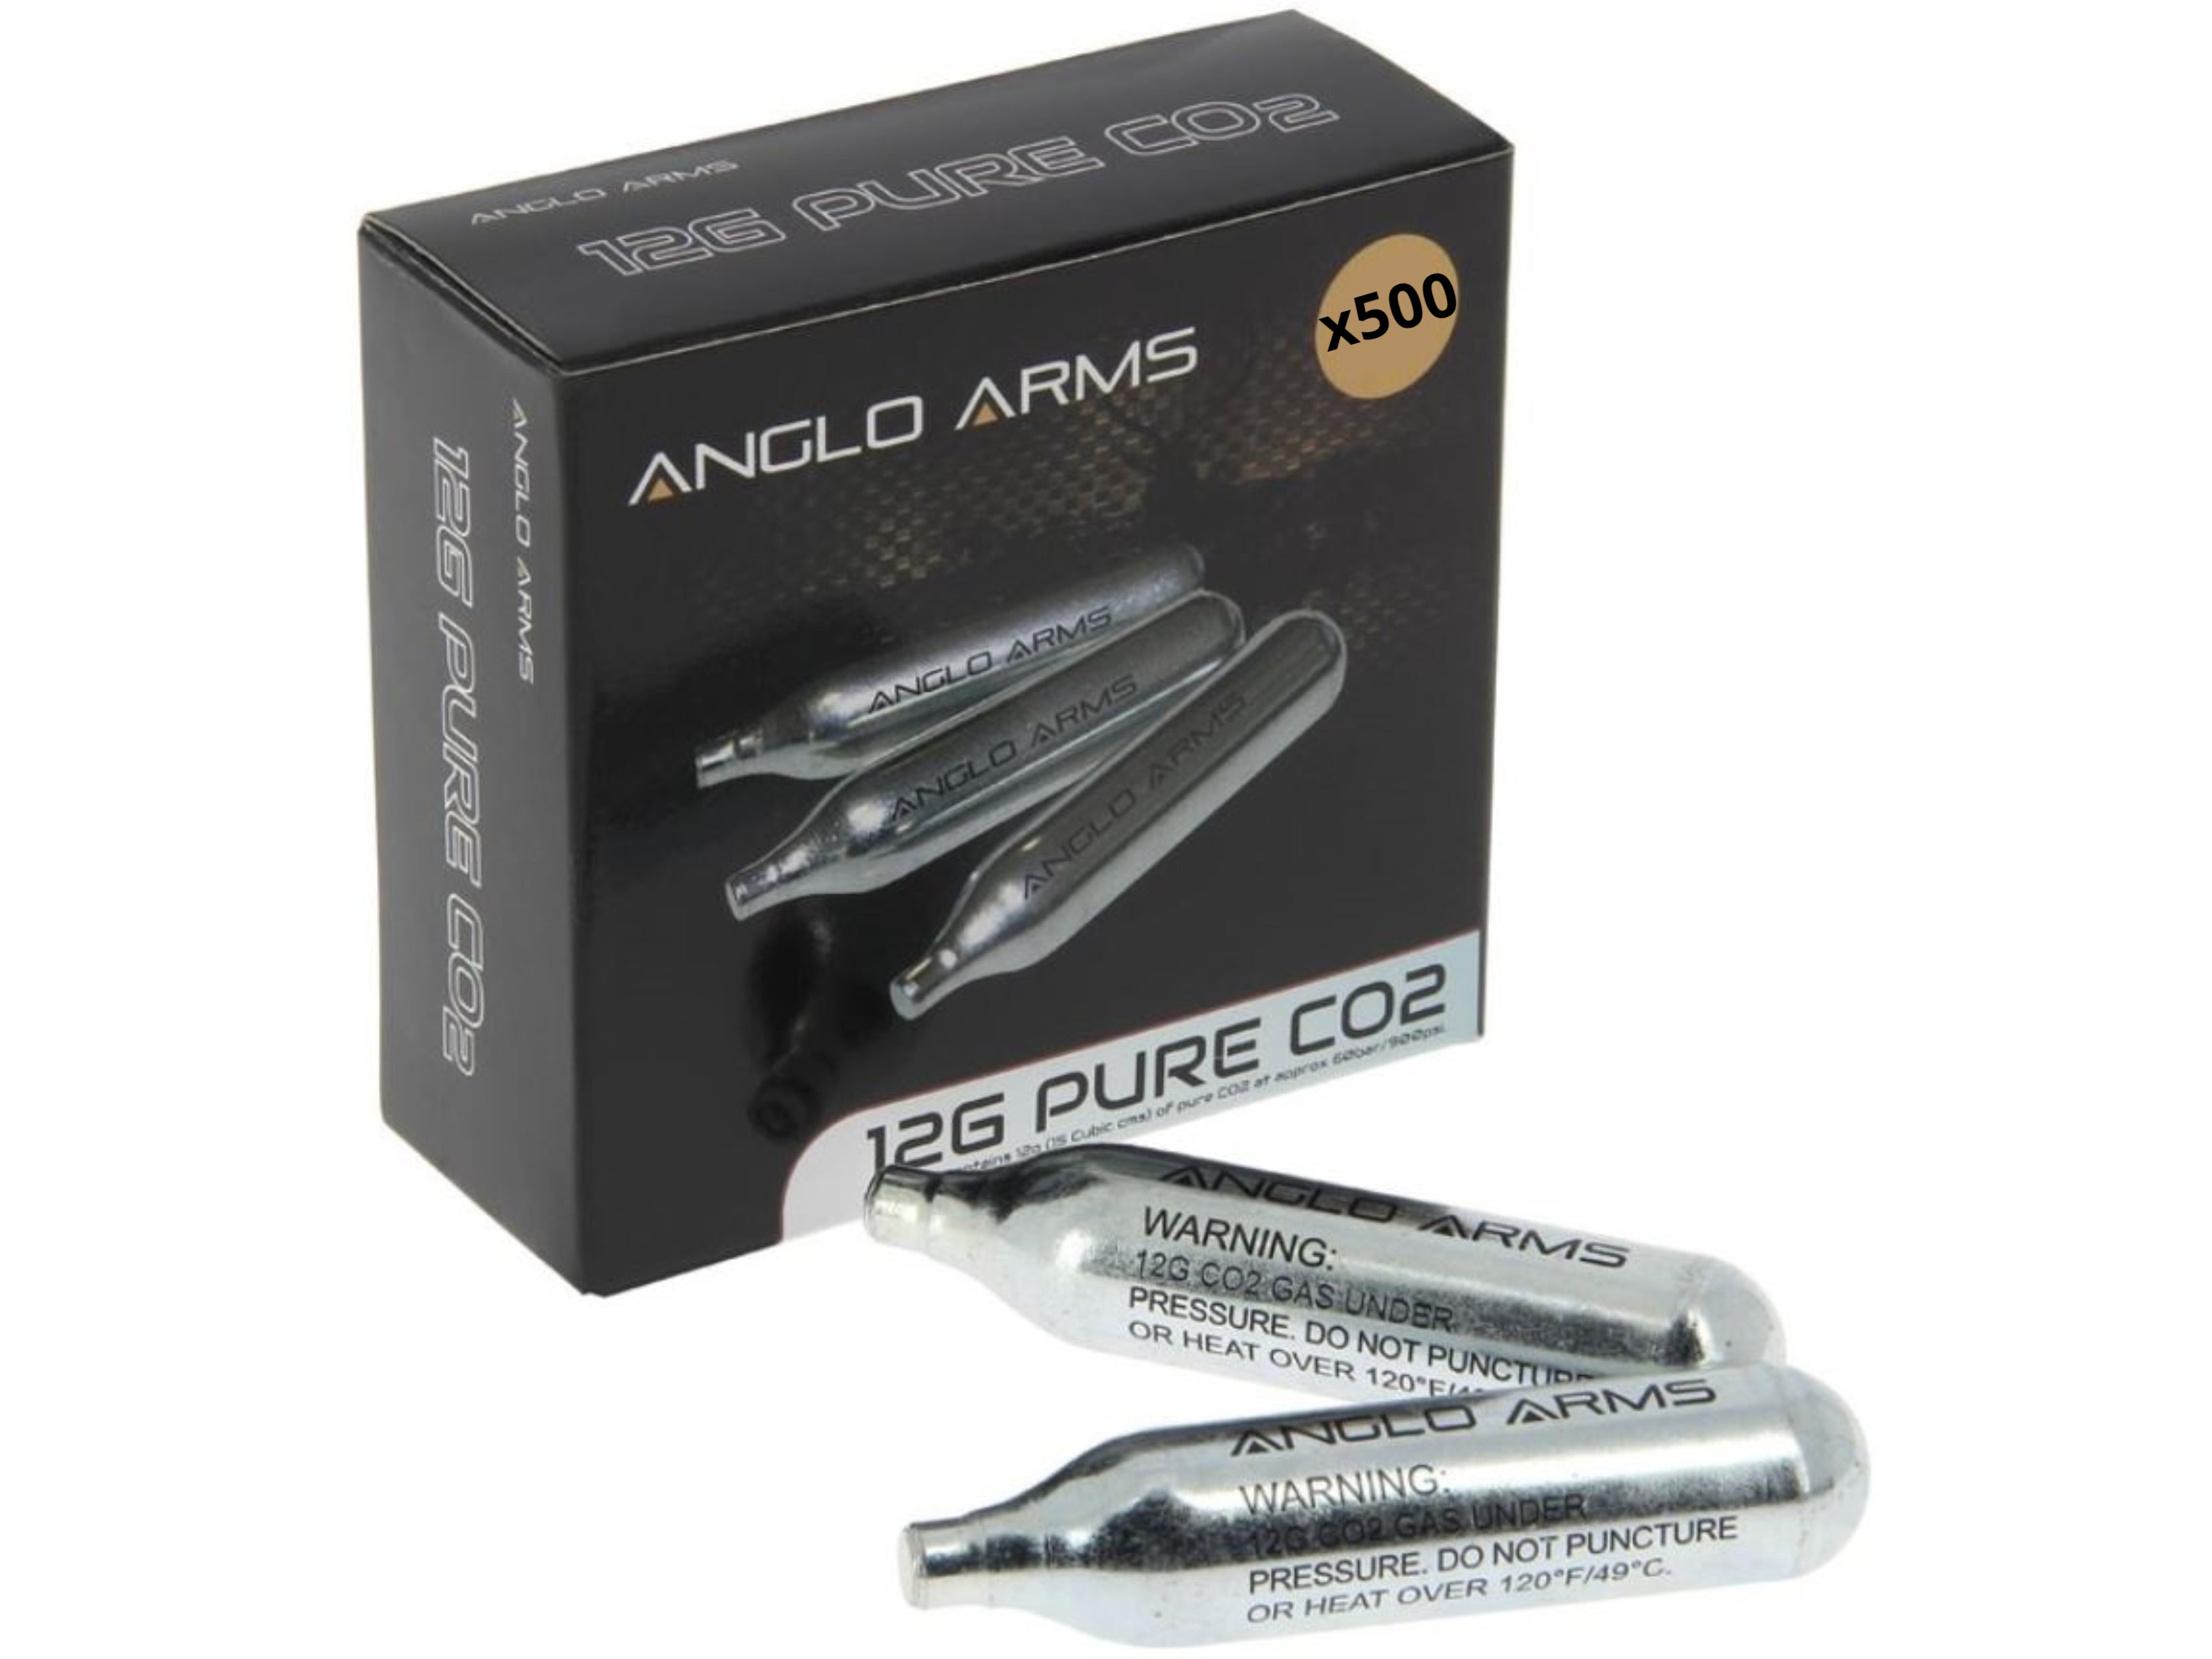 ANGLO ARMS 500 X ANGLO ARMS 12G GRAM CO2 CAPSULE CARTRIDGE SET